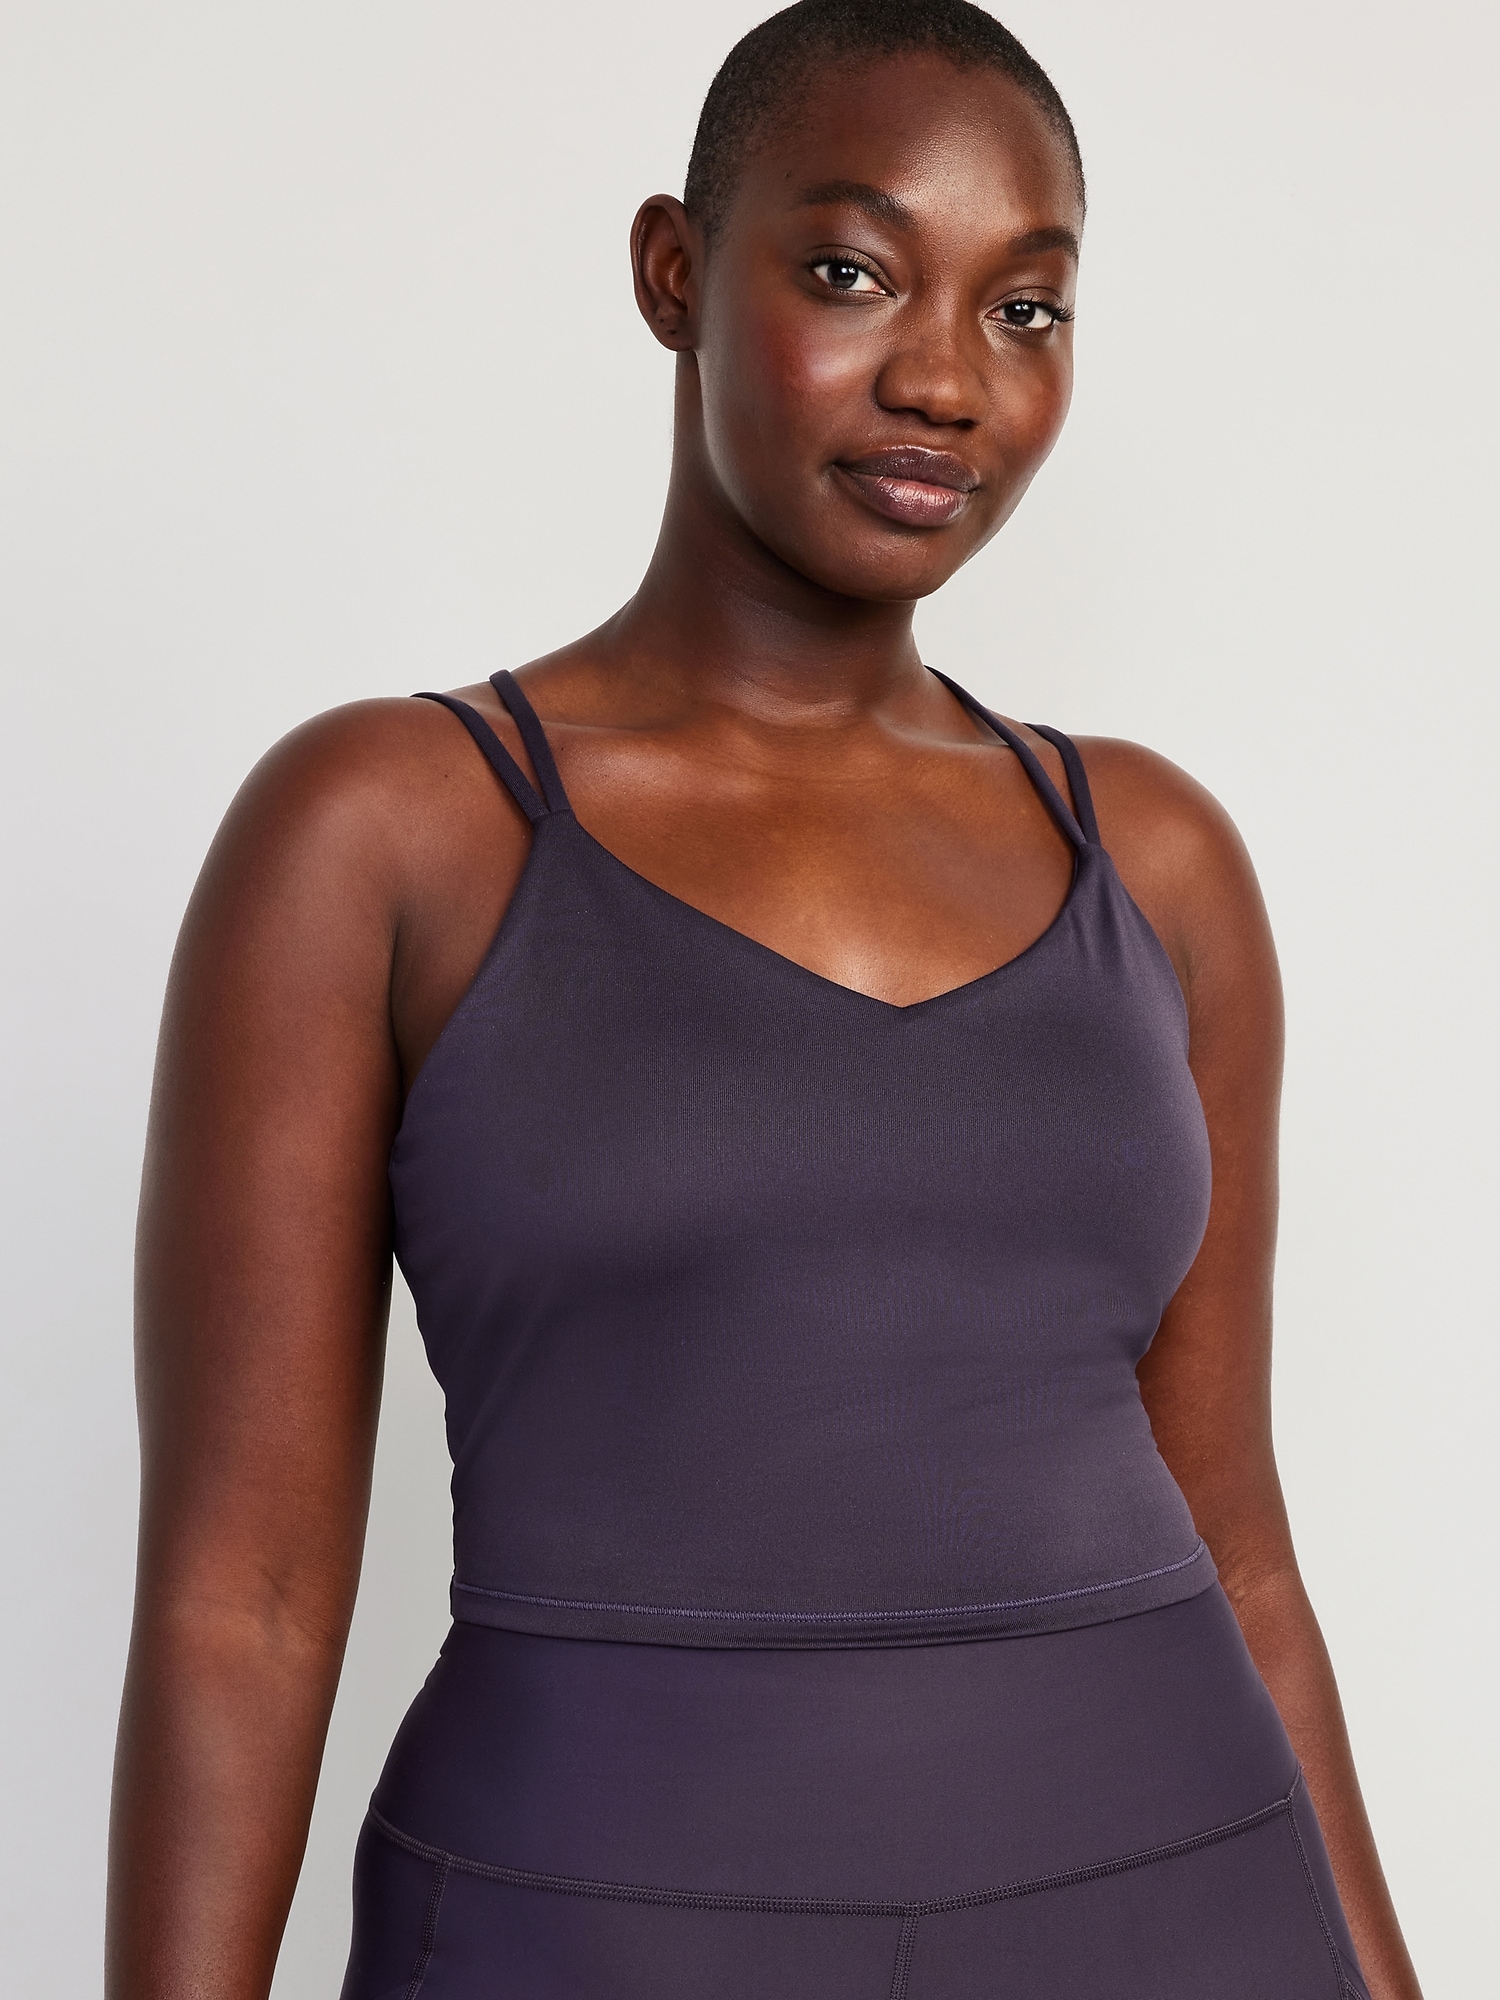 Old Navy Medium Support PowerPress Strappy Sports Bra, 29 New Activewear  Pieces From Old Navy We're Loving This November, Starting at $20